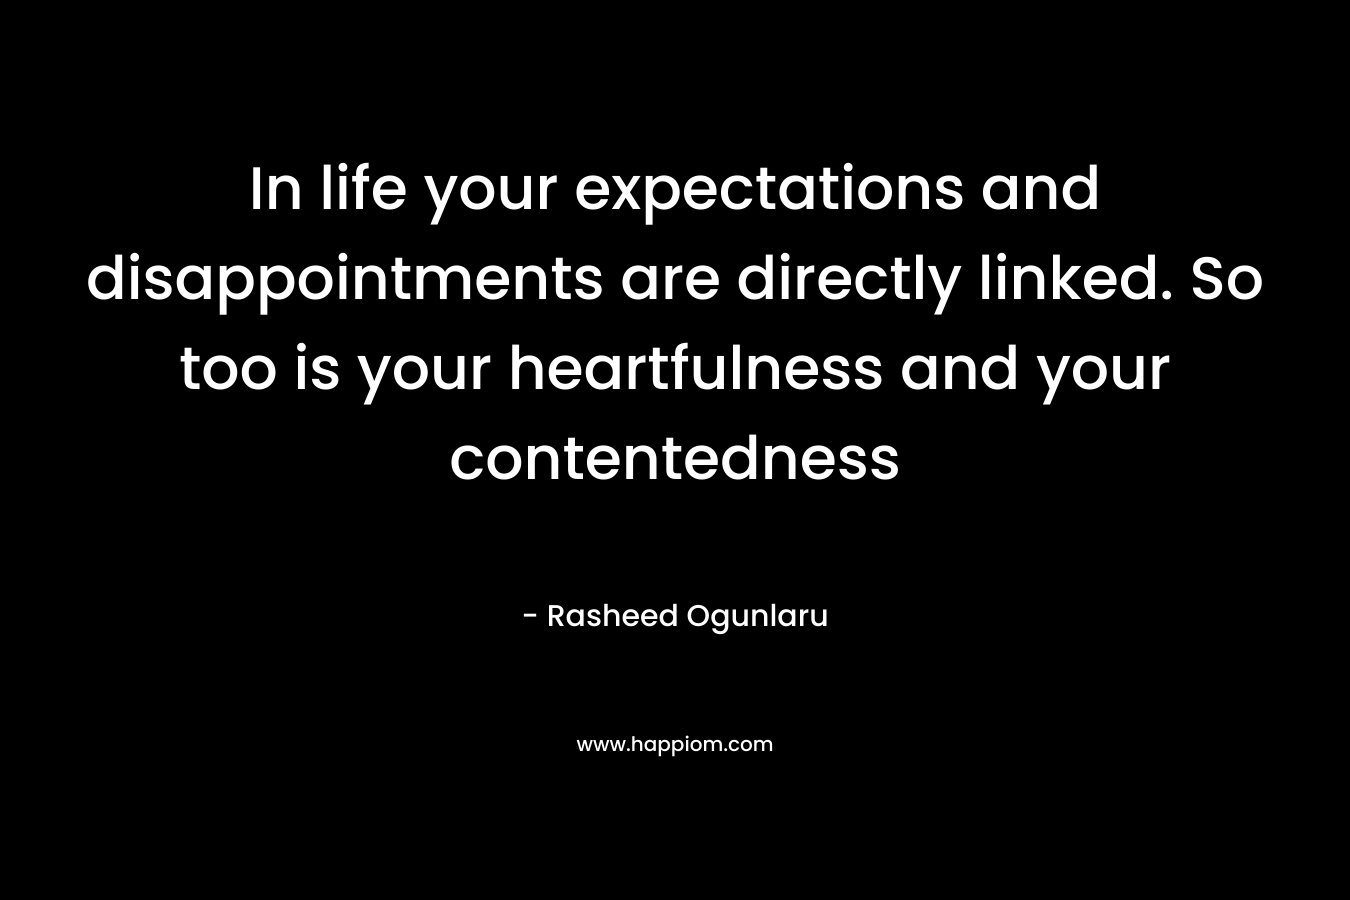 In life your expectations and disappointments are directly linked. So too is your heartfulness and your contentedness – Rasheed Ogunlaru